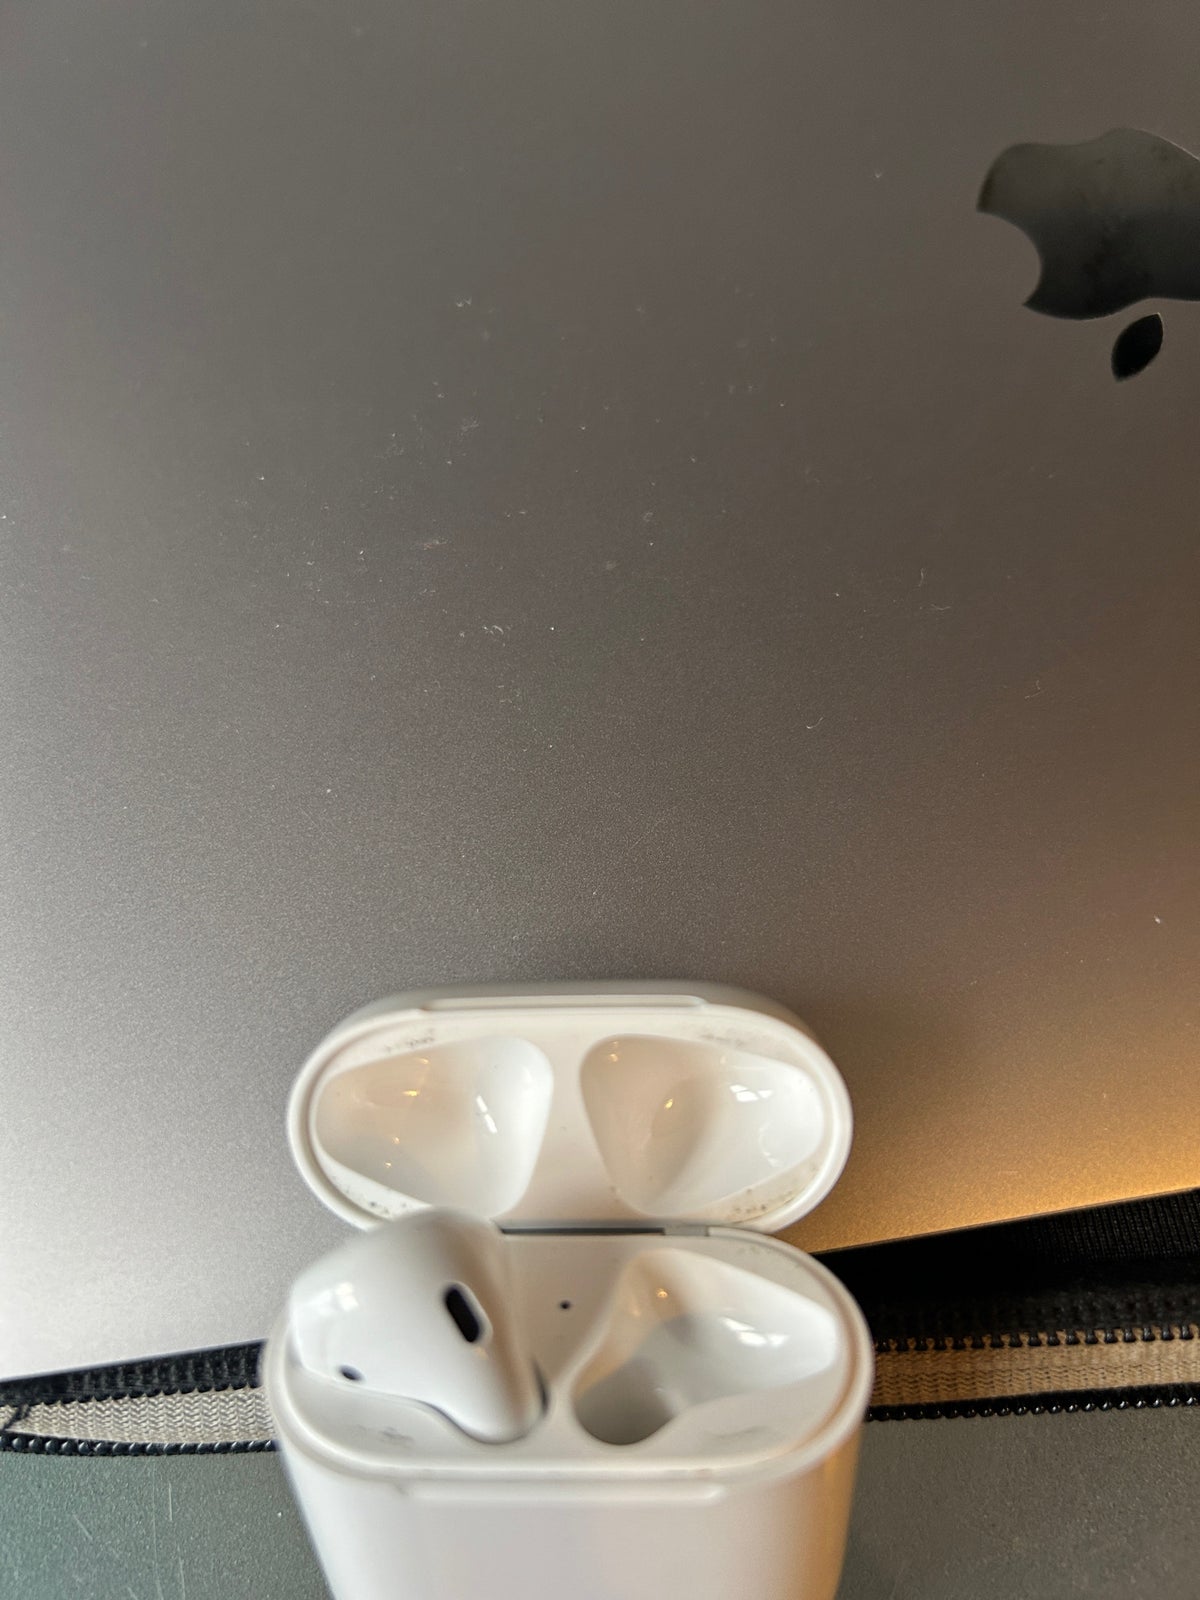 Apple AirPods, AirPods , God